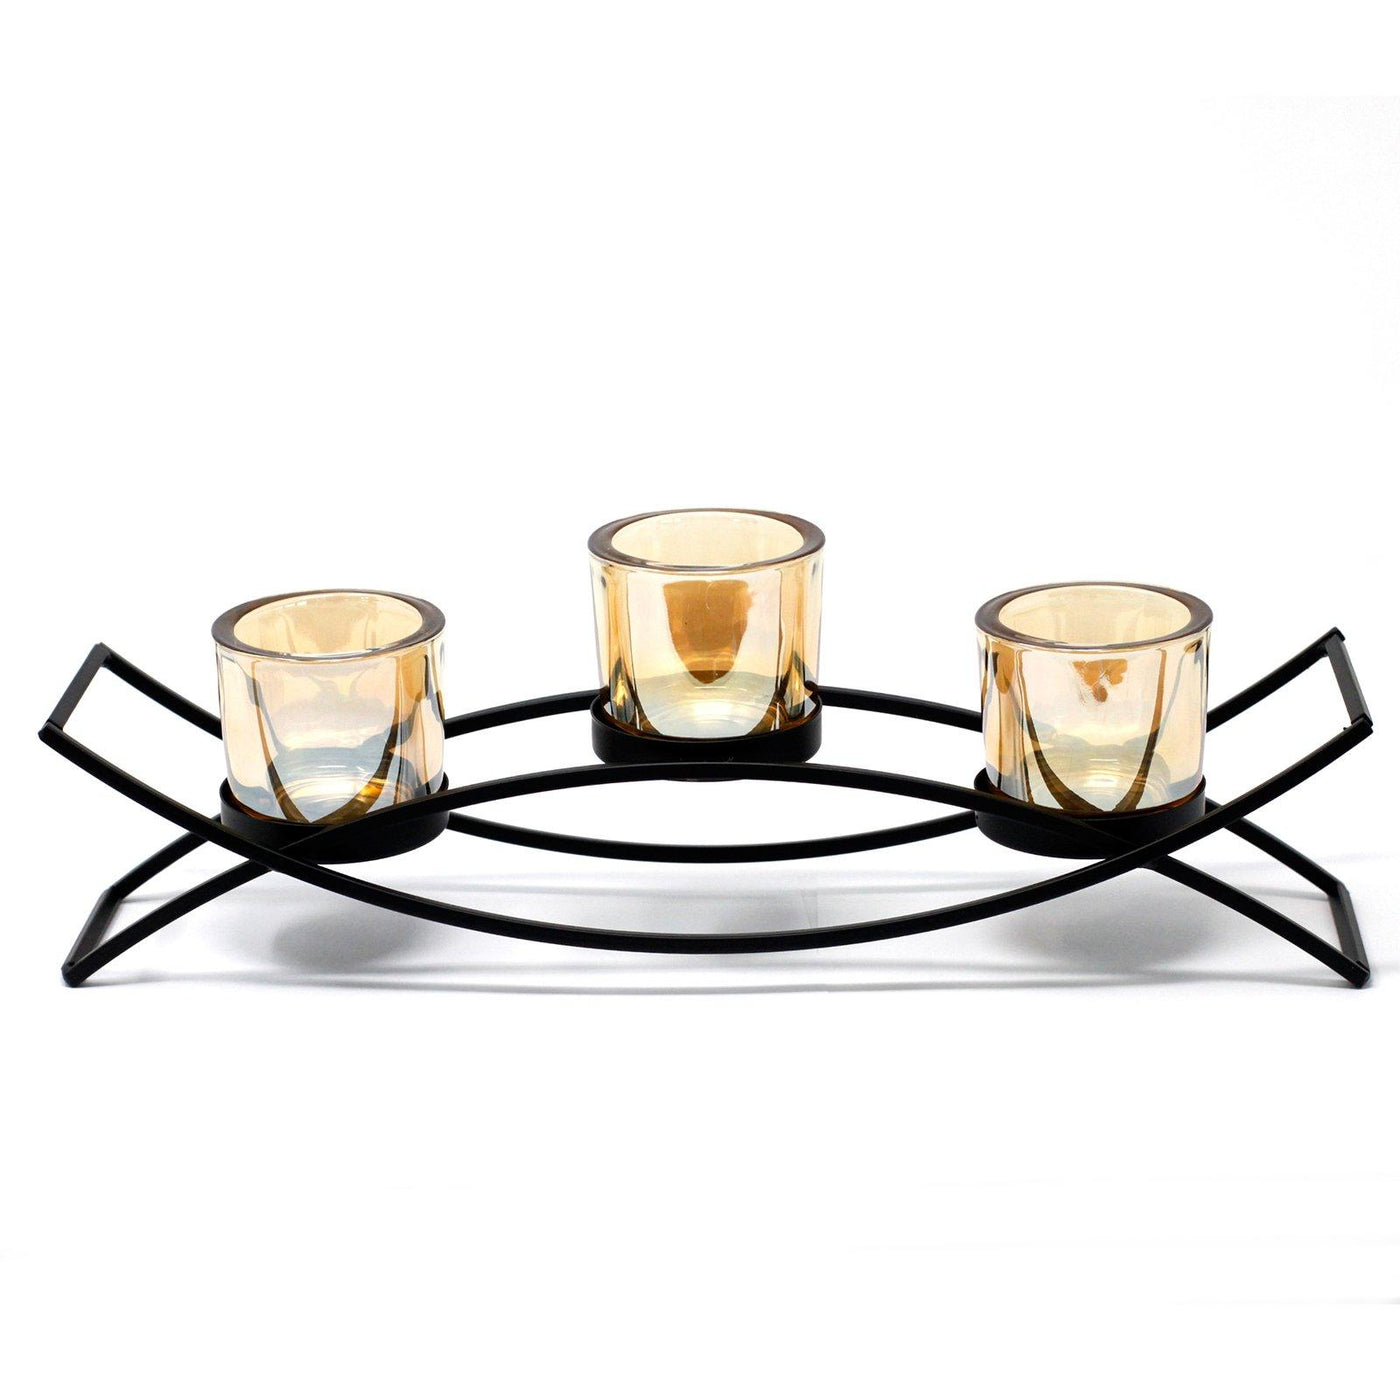 Centrepiece Silhouette Tree Gold Amber Glass And Iron Votive Tealight Candle Holder.